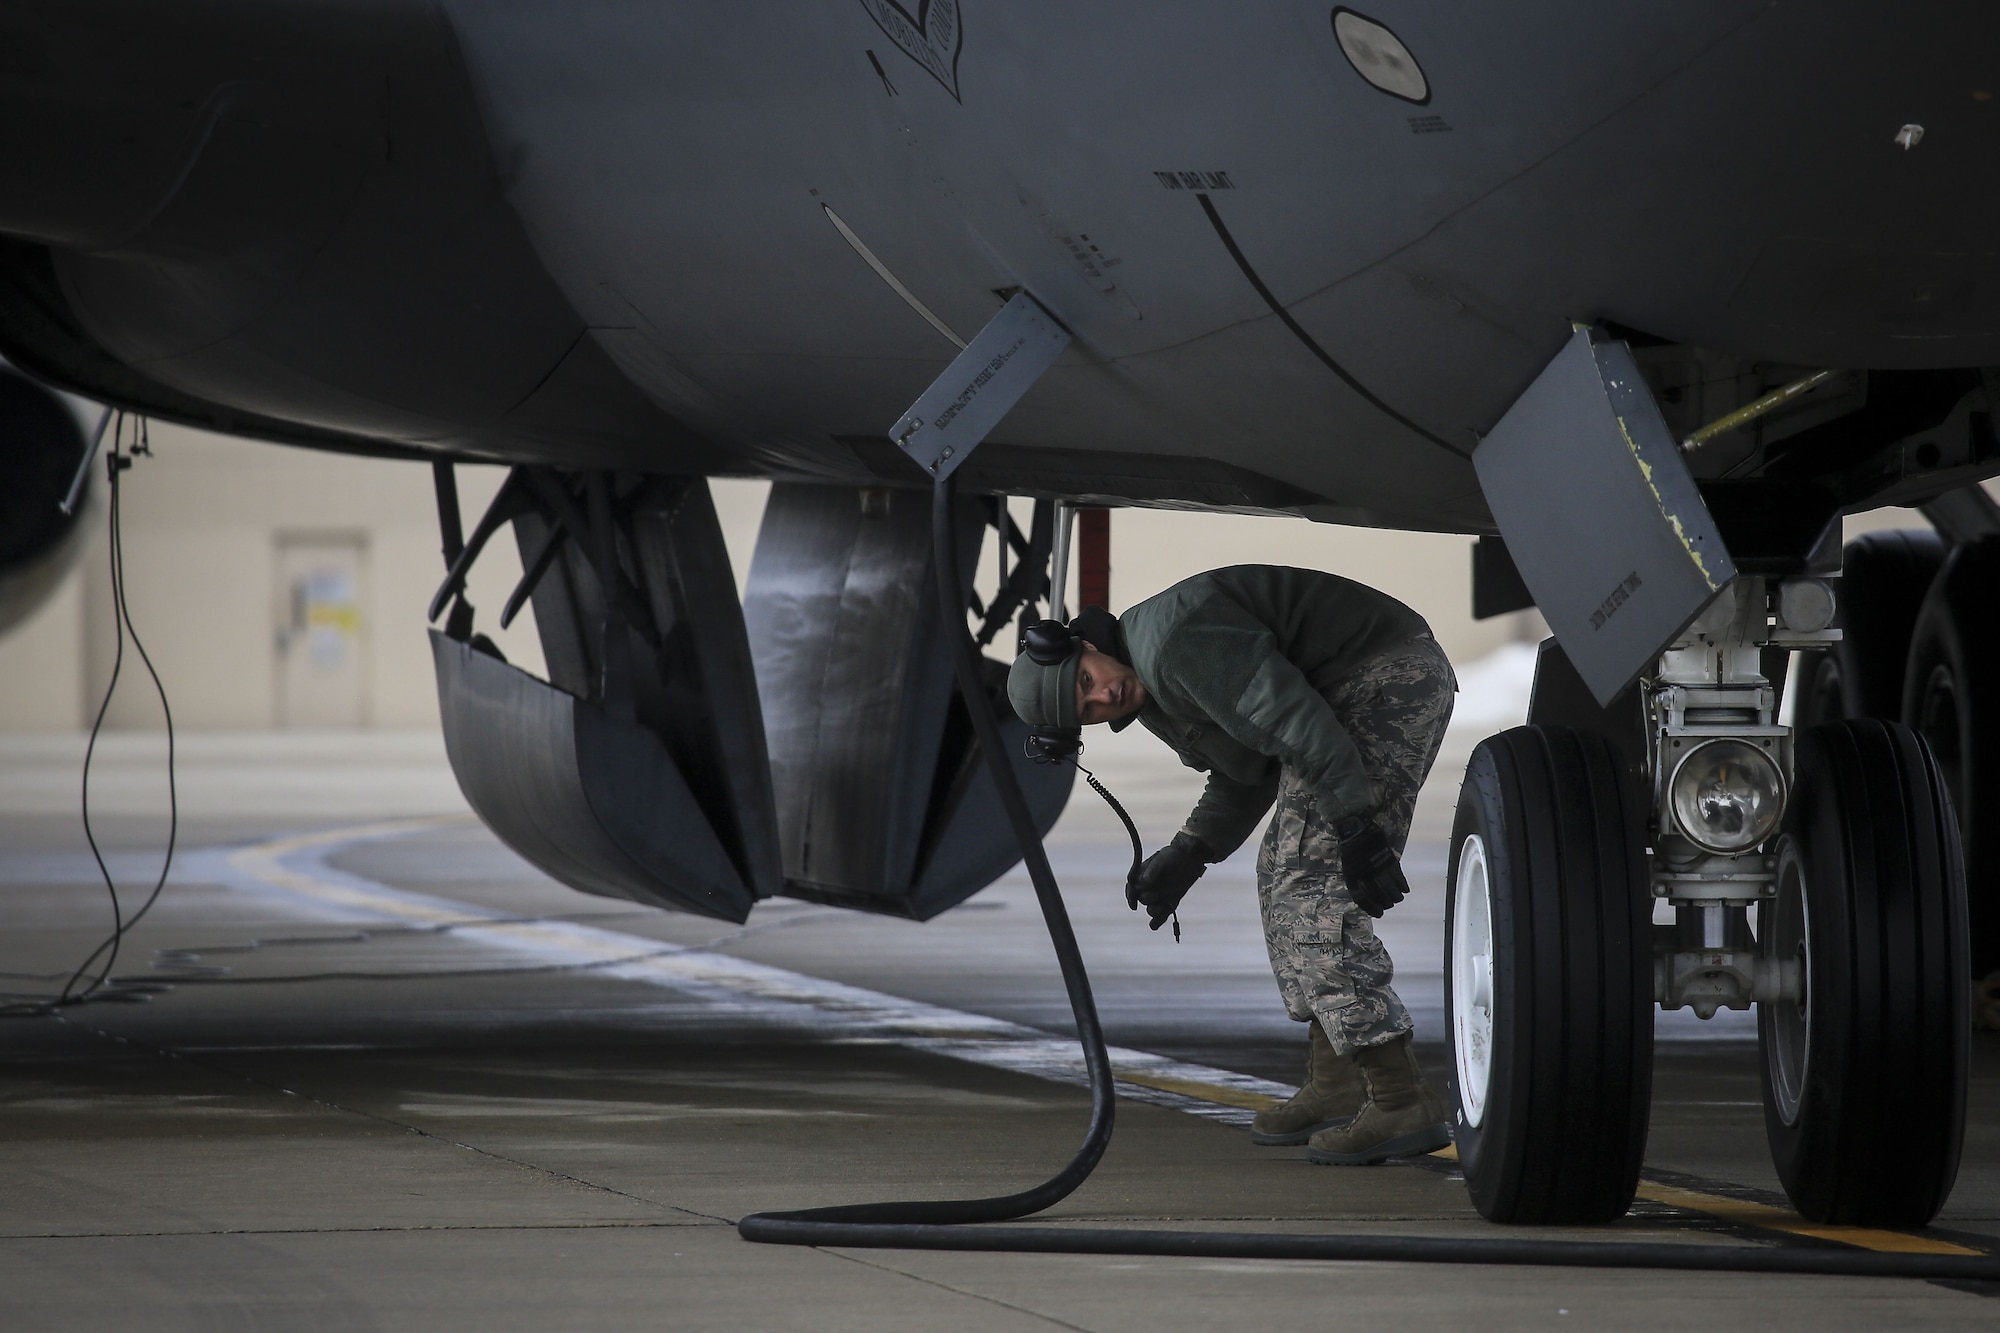 New Jersey Air National Guard Staff Sgt. Robert Cento does pre-flight checks on a 108th Wing KC-135R Stratotanker prior to a training flight on Joint Base McGuire-Dix-Lakehurst, N.J., Jan. 11, 2018. (U.S. Air National Guard photo by Master Sgt. Matt Hecht)